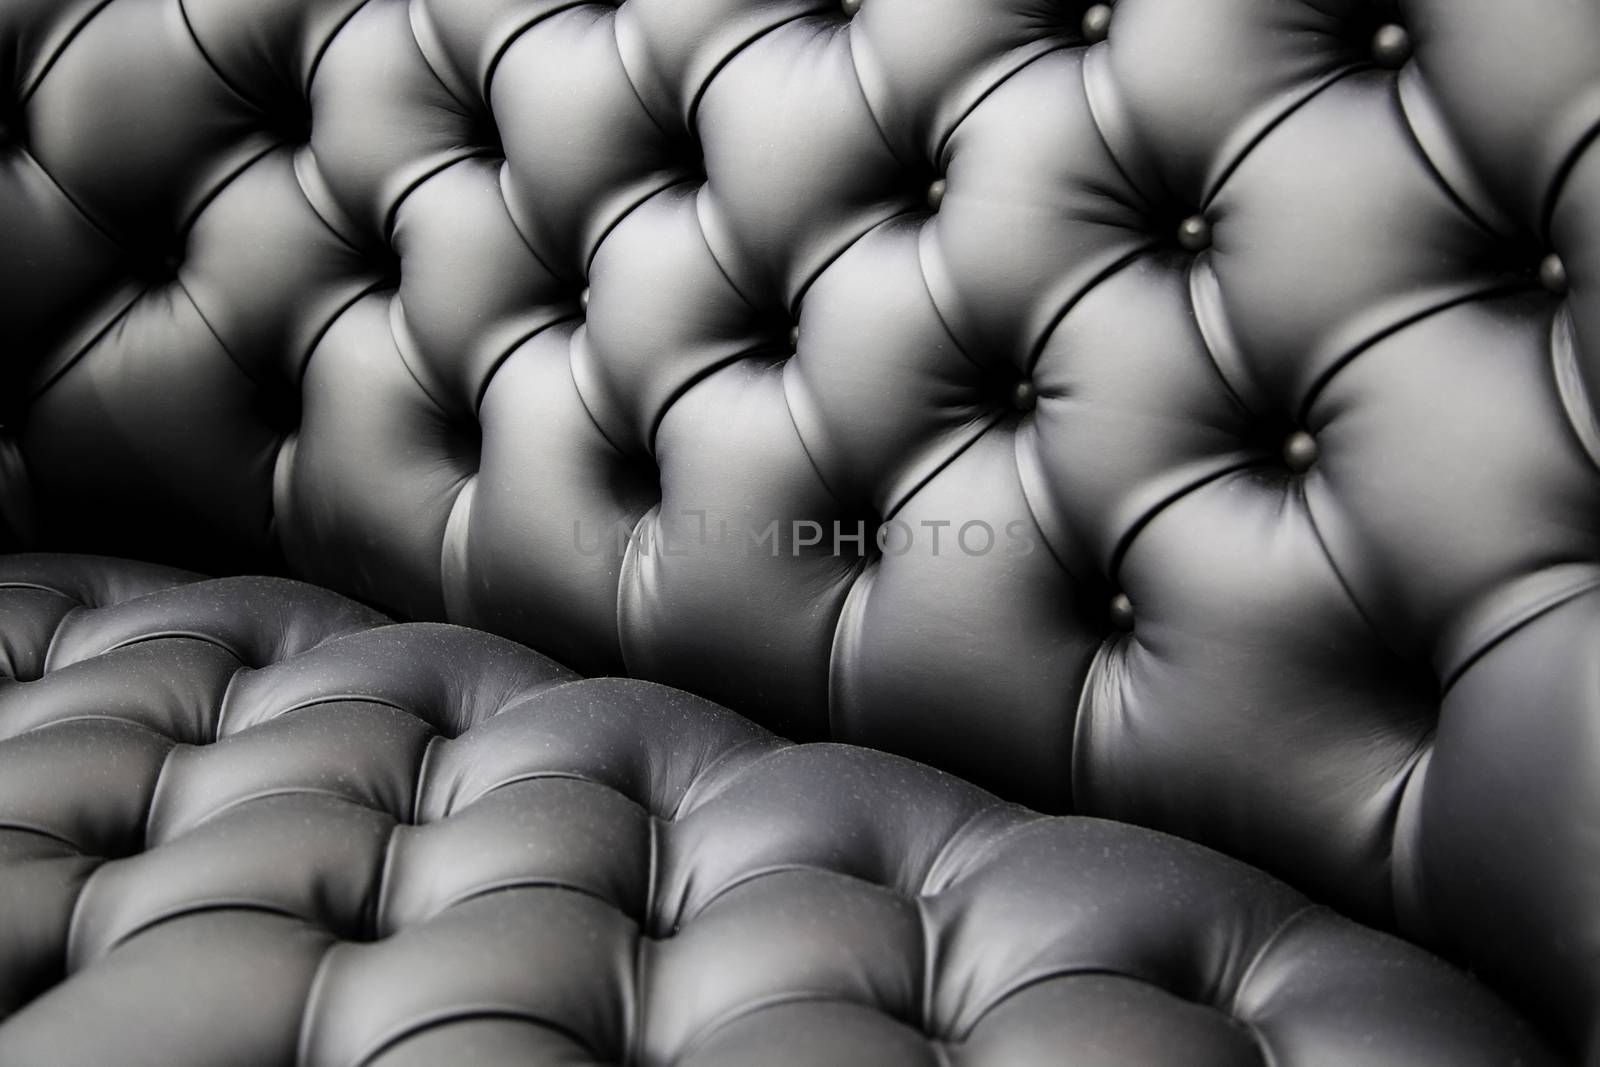 Bright leather detail, detail of animal skin on a seat